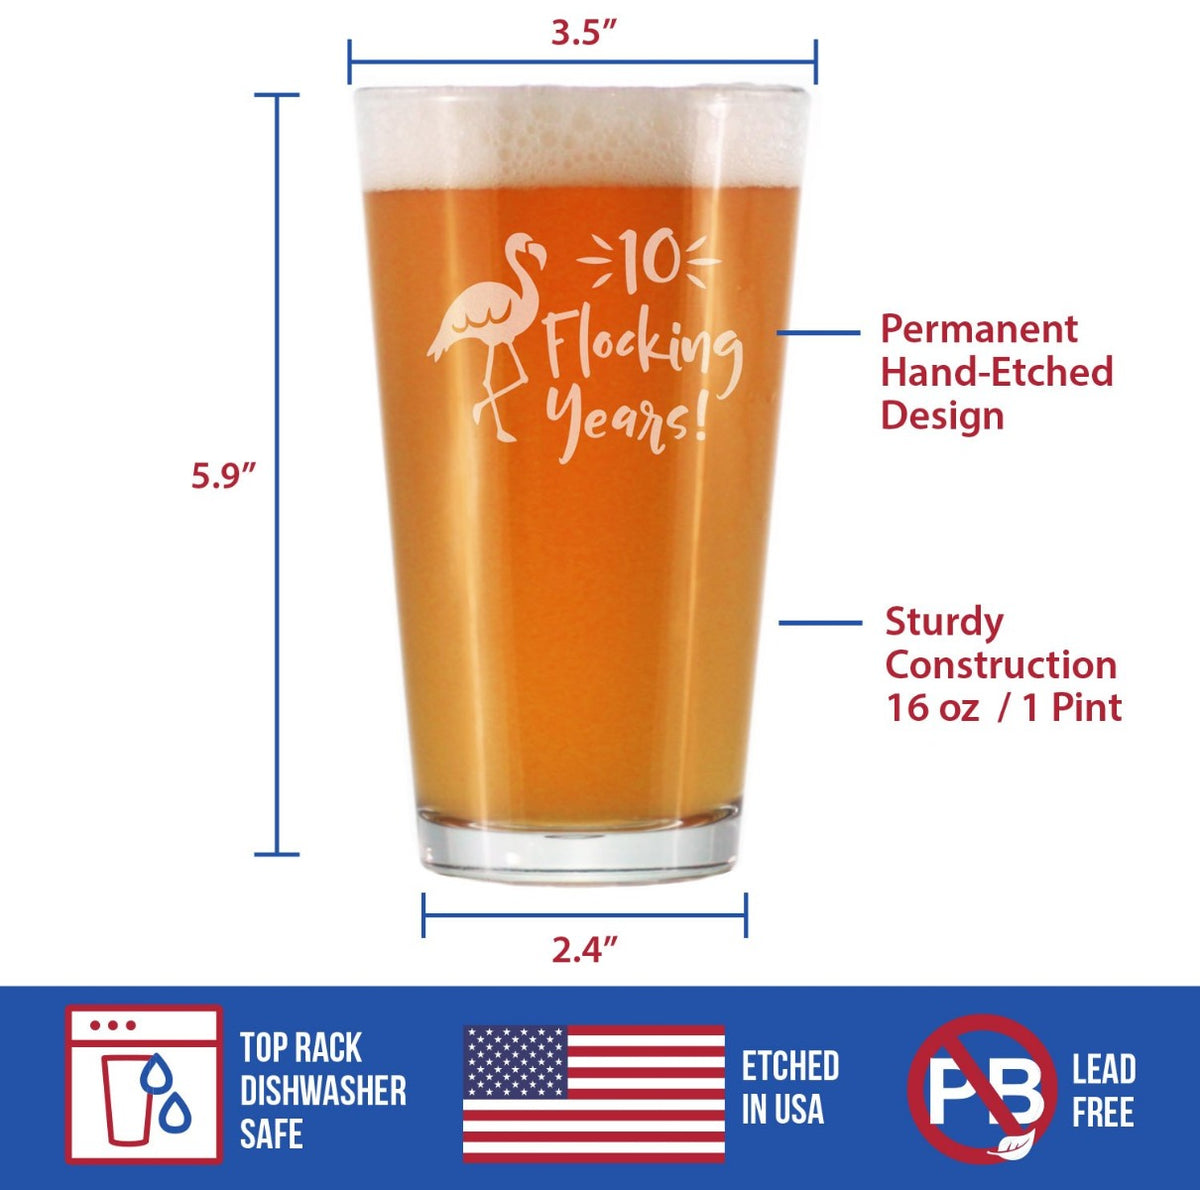 10 Flocking Years - 16 Ounce Pint Glass